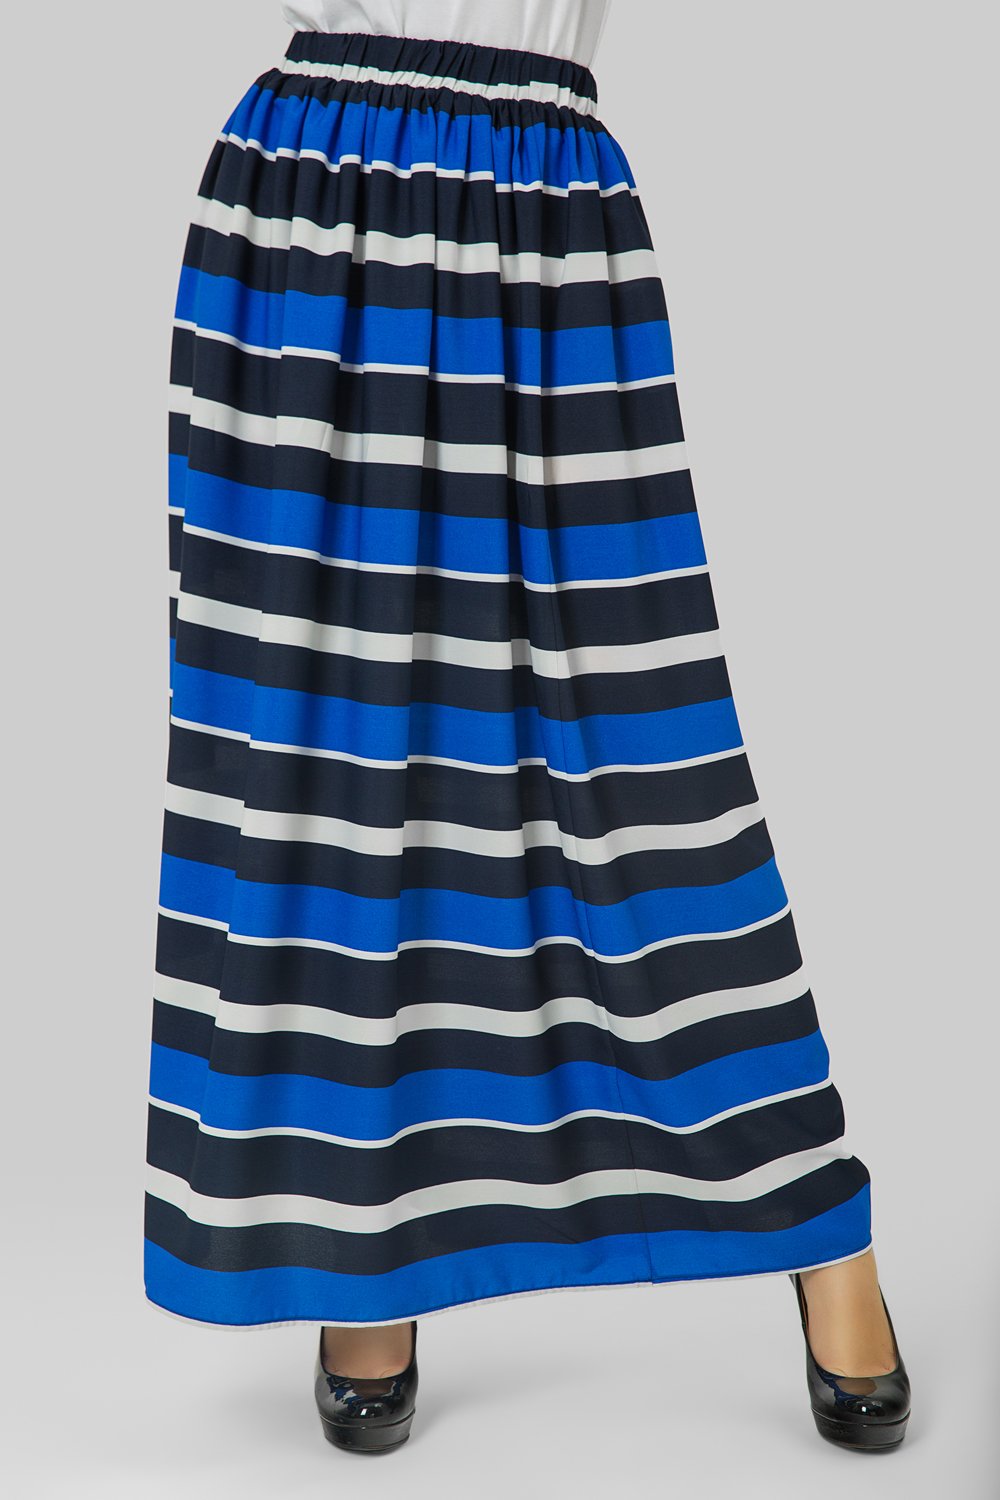 Striped maxi skirt in blue